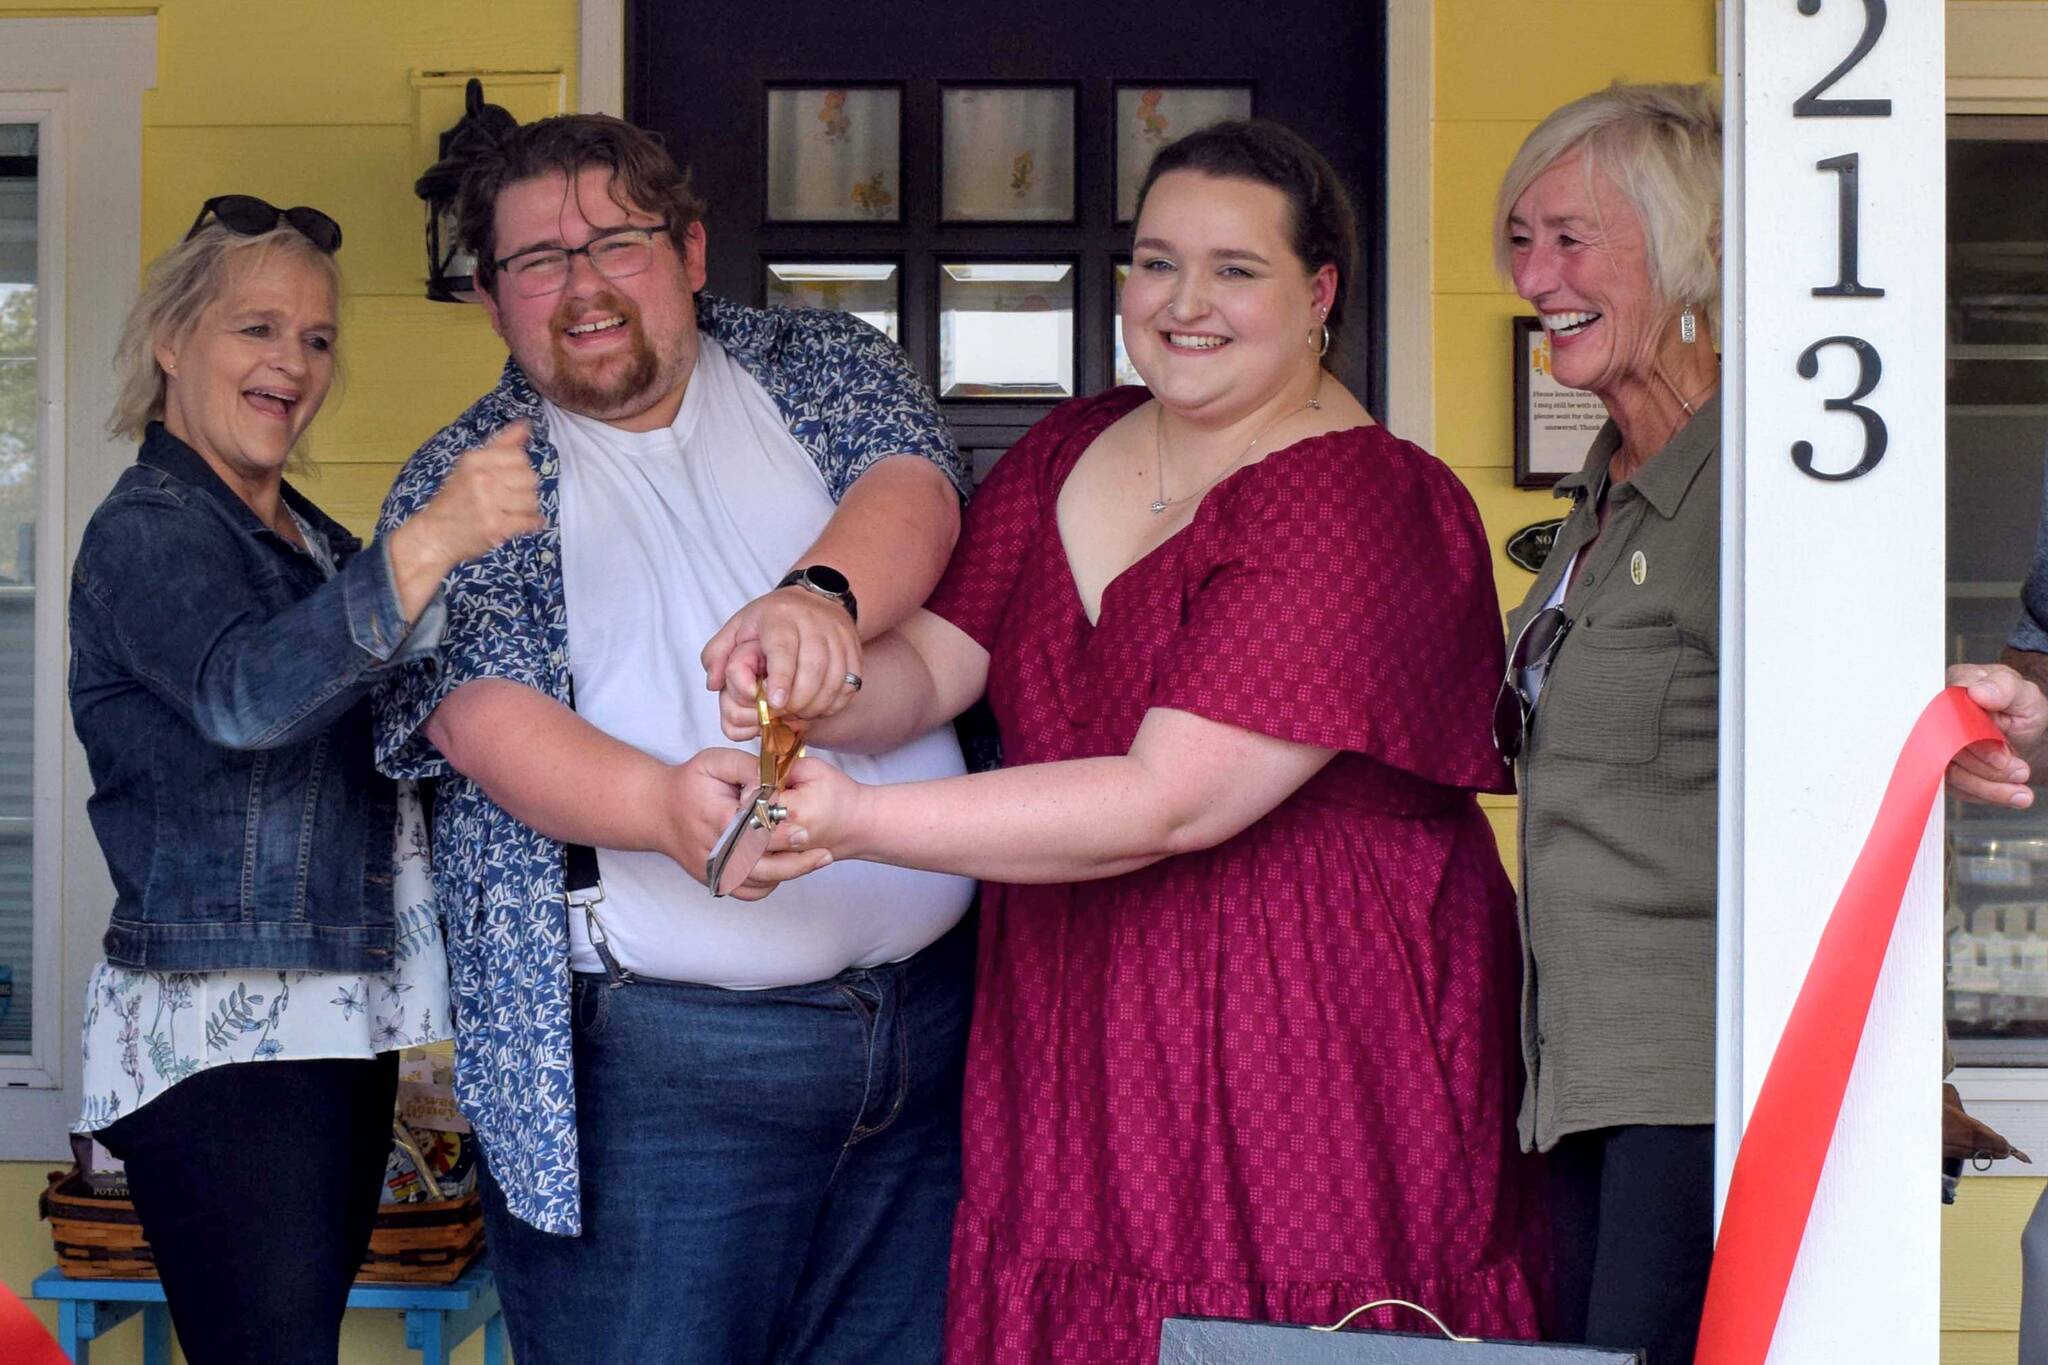 Photo by Conor Wilson/Valley Record
Sarah Green (center right) celebrates the grand opening of Sweet Honey Esthetics with her mom, Heidi, and fiancé, Jay, on Sept. 21. The spa is at 213 Main Ave. North in North Bend.